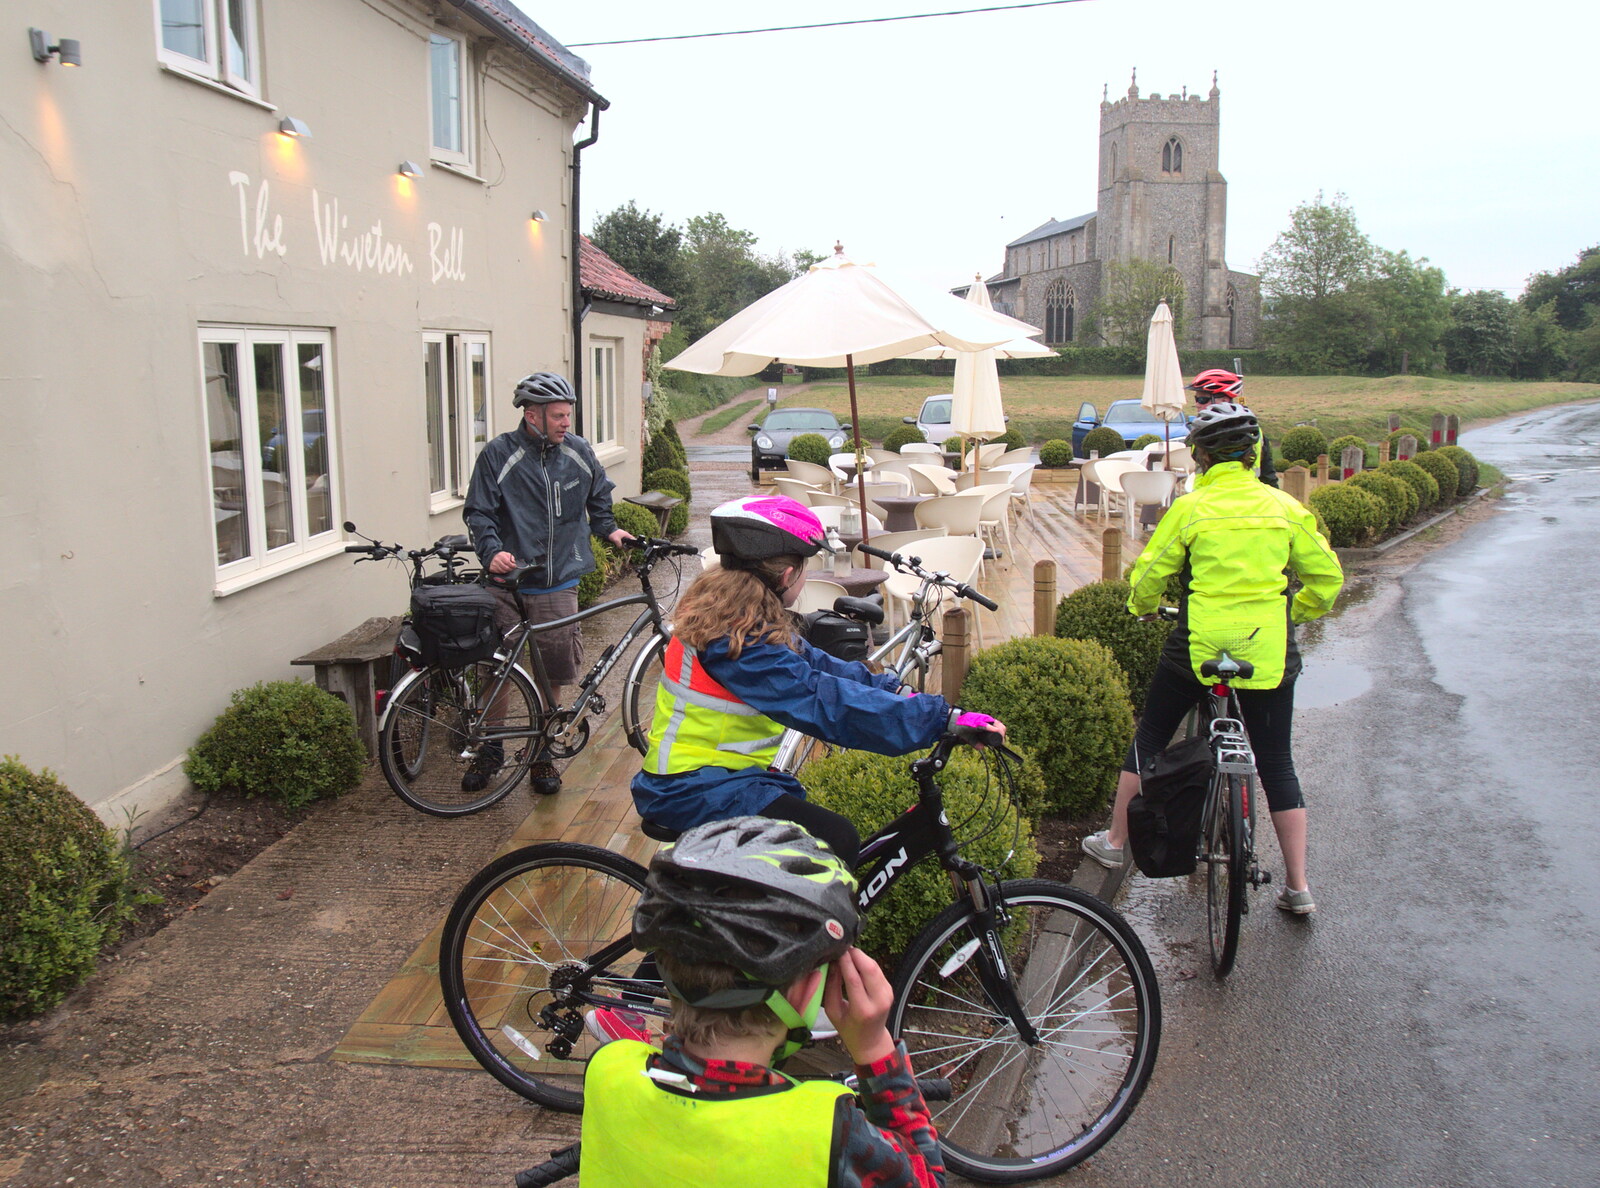 There's a stop at the Wiveton Bell from The BSCC Weekend Away, Holt, Norfolk - 12th May 2018